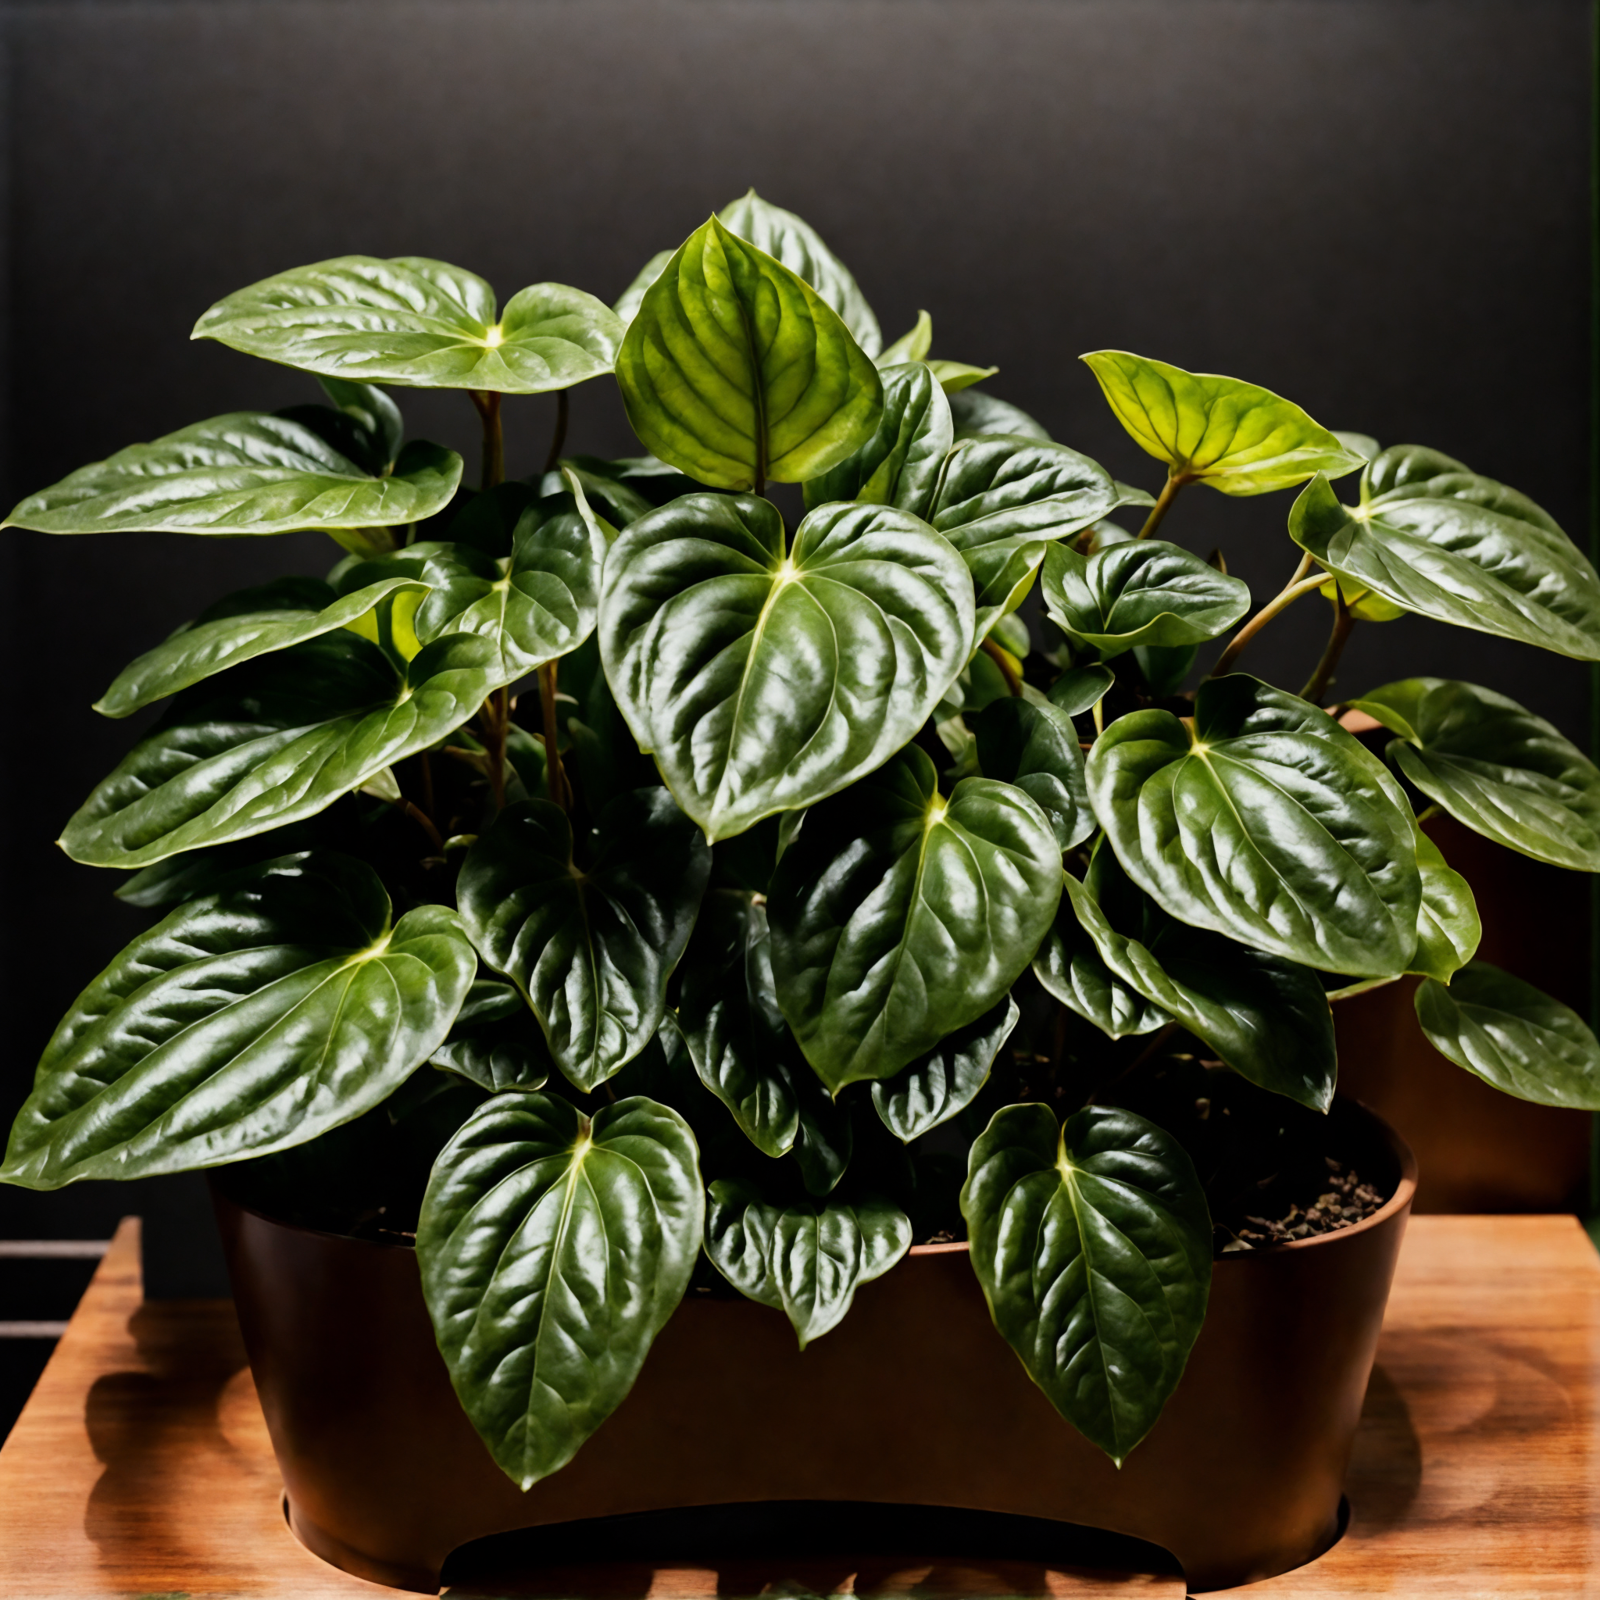 Peperomia caperata in a brown bowl on a wooden table, with clear lighting and a dark background.